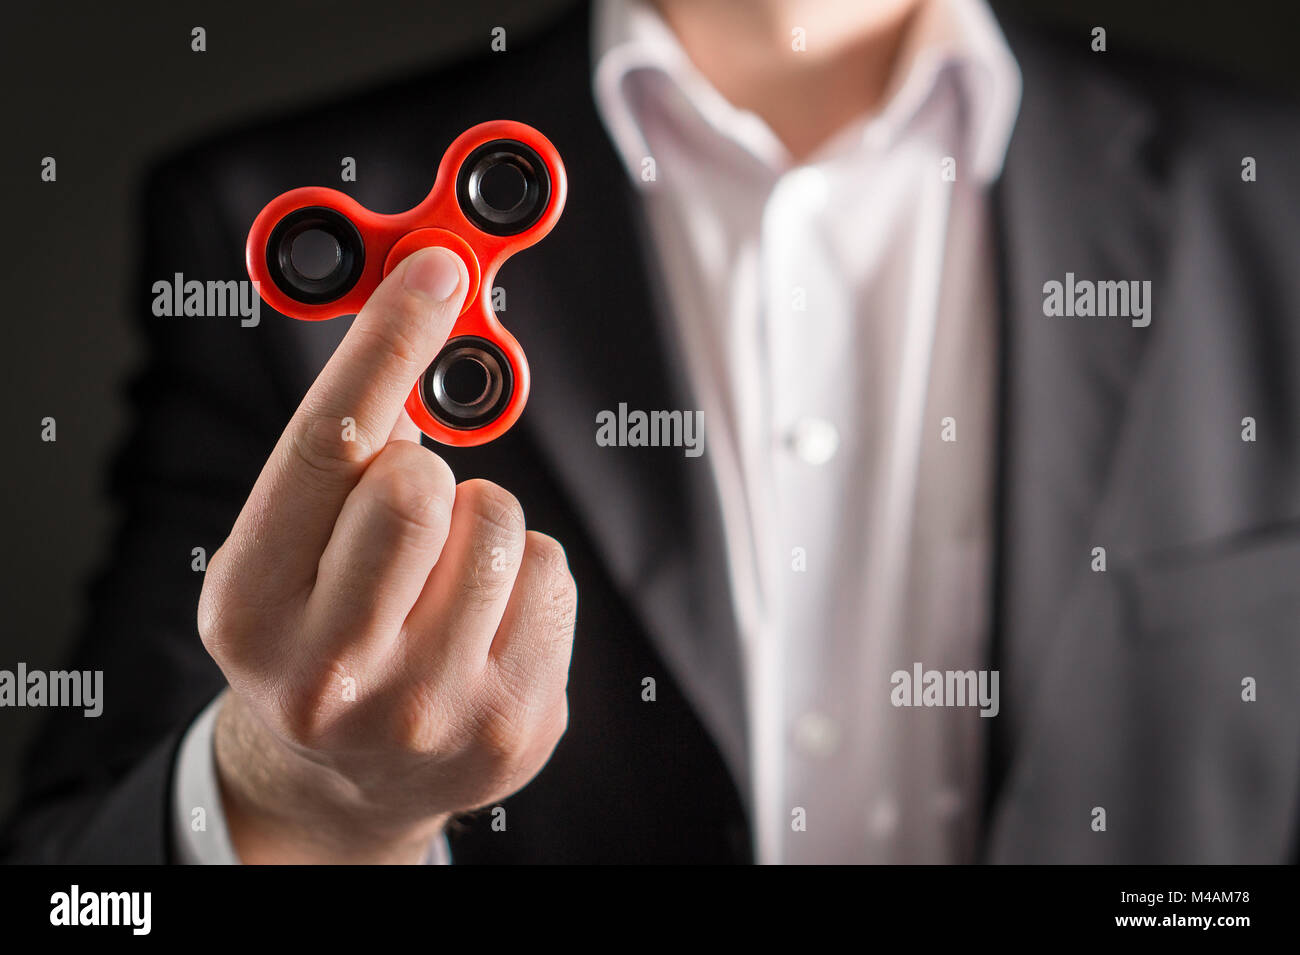 Business man with a fidget spinner. Businessman in a suit holding trendy kids anxiety relief toy in hand. Stock Photo